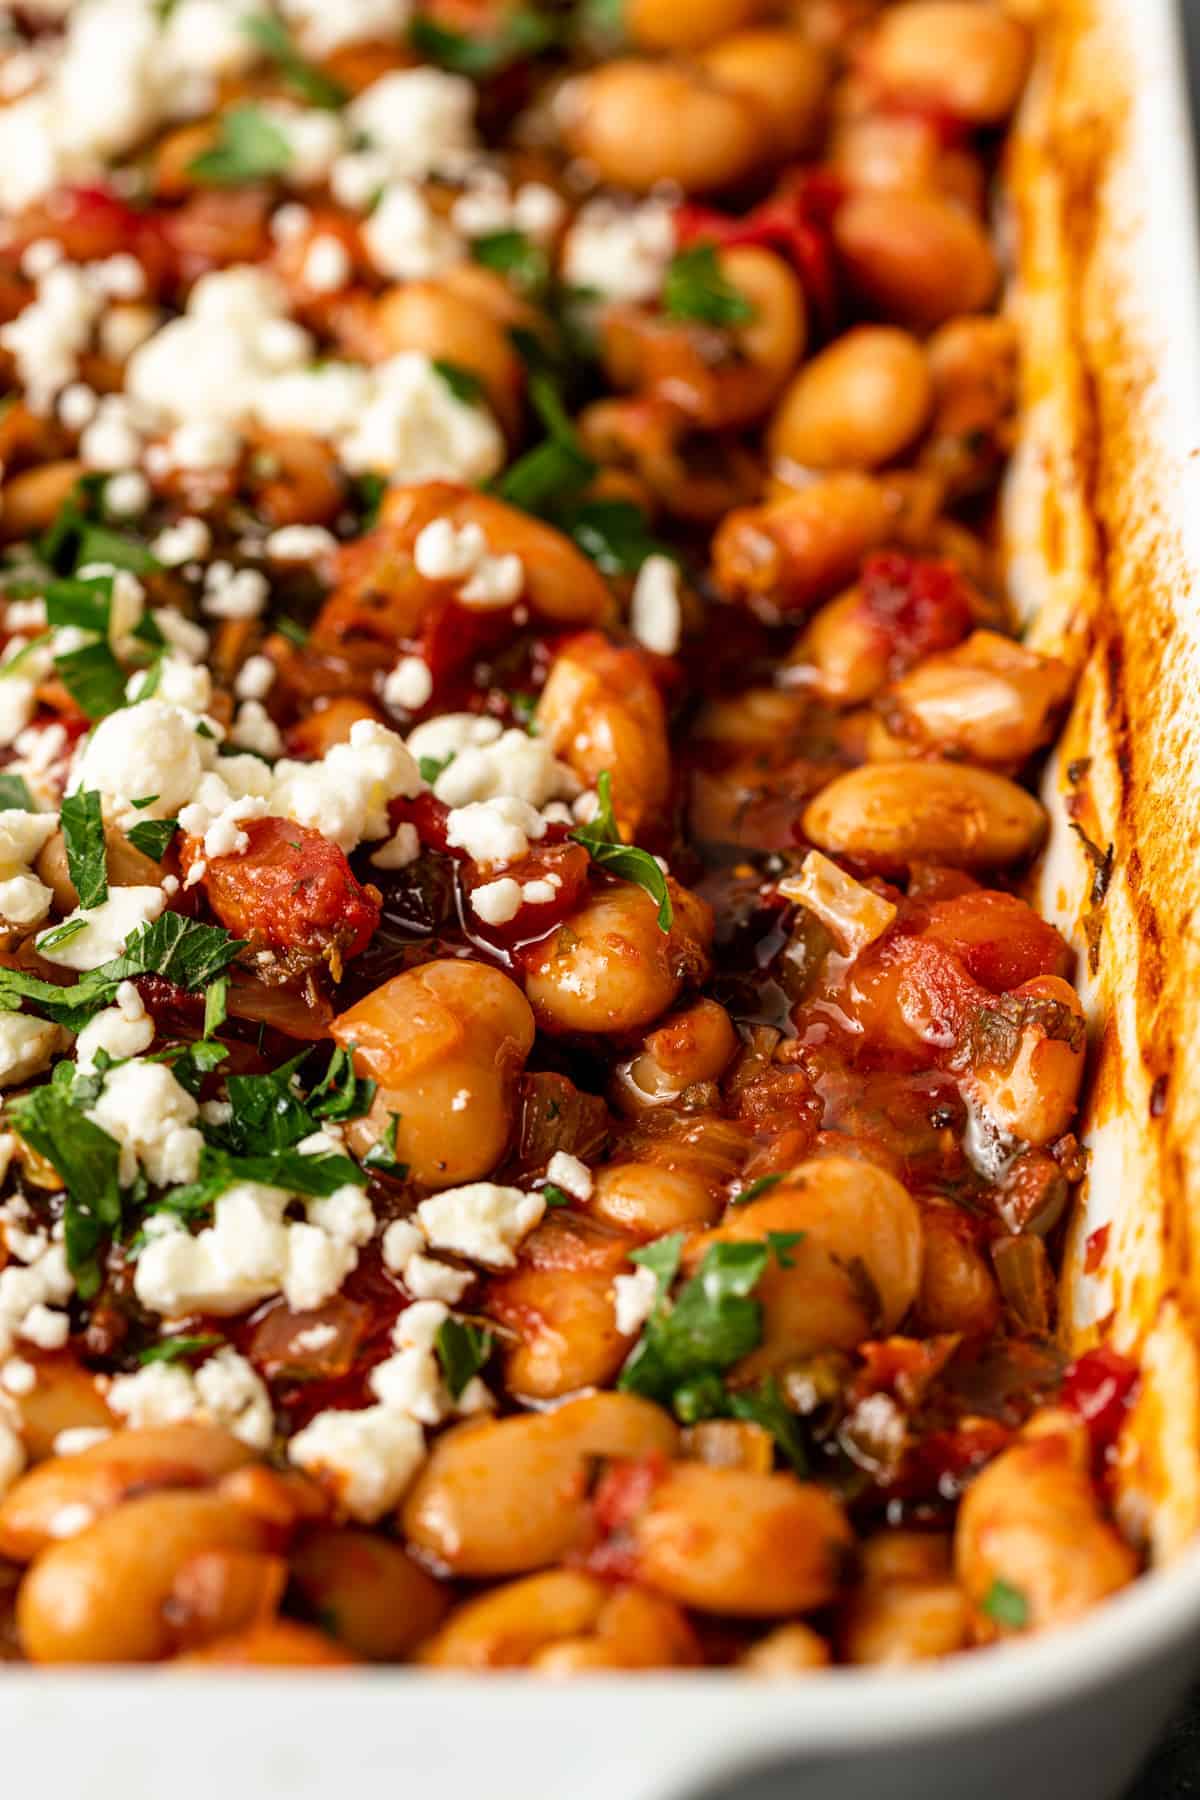 overhead image: casserole dish of baked Greek beans in tomato sauce with parsley and feta cheese